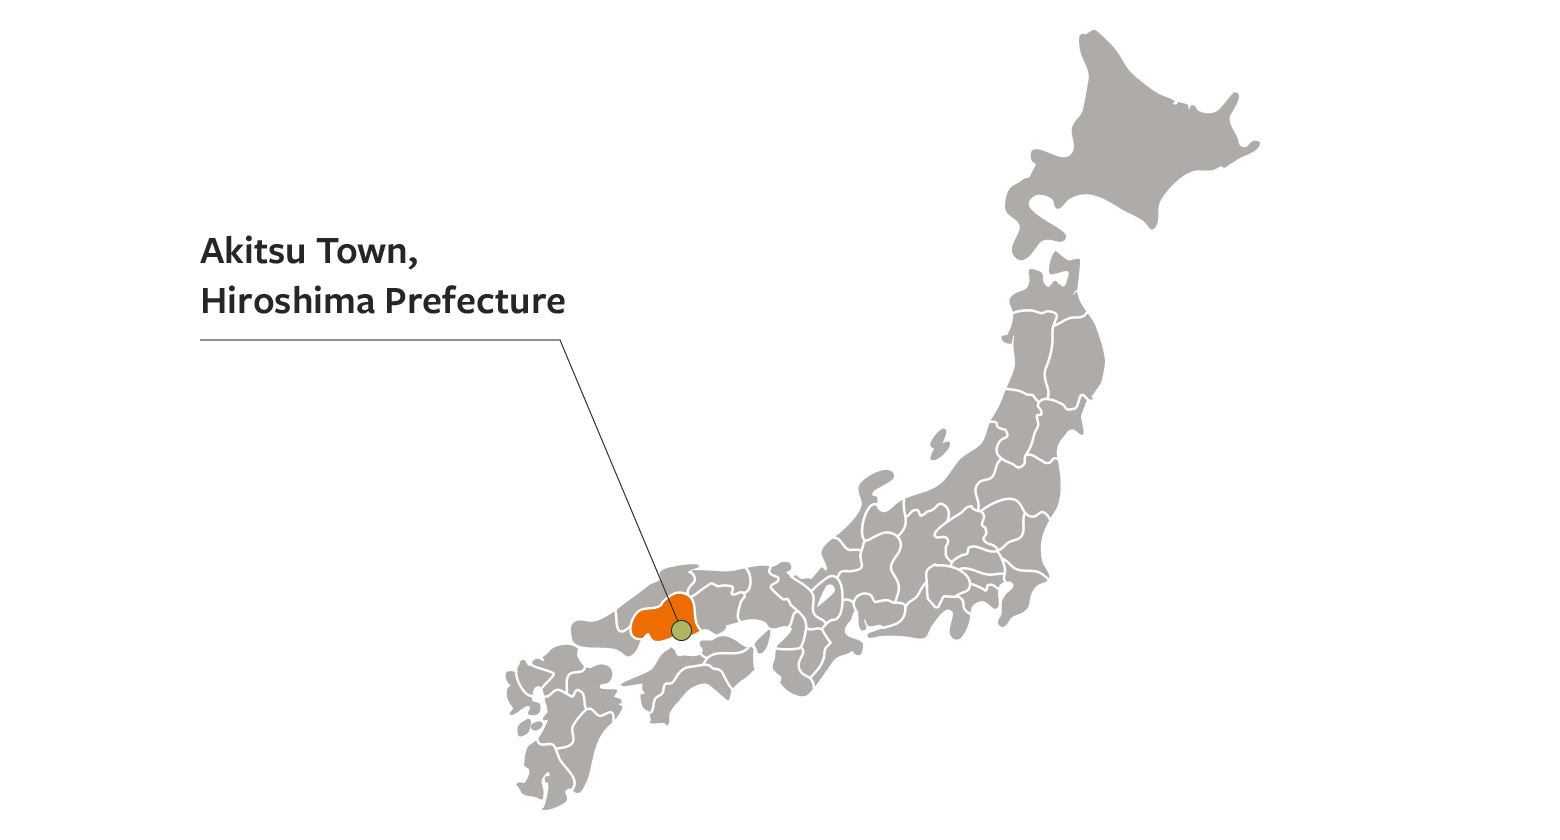 Japanese map that is pointing Akitsu town, Hiroshima prefecture